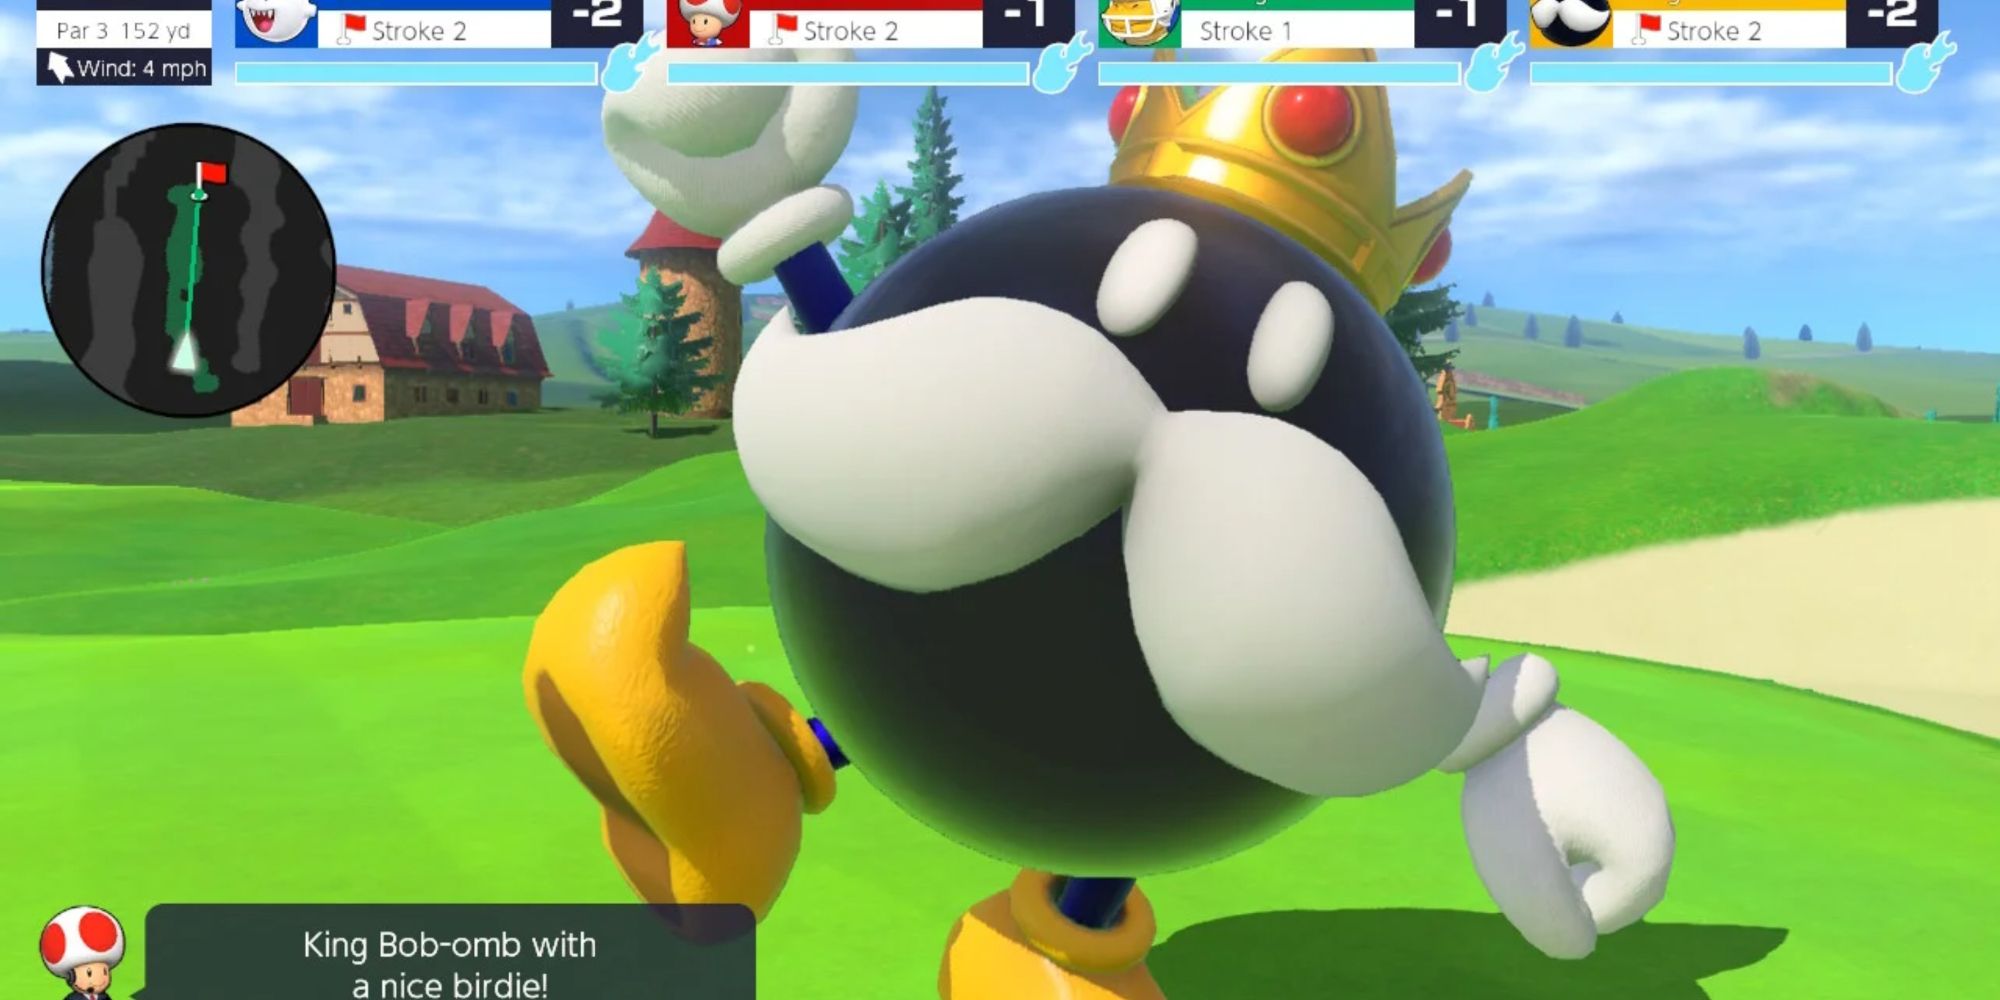 King Bob-omb Pumping His Fist Into The Air